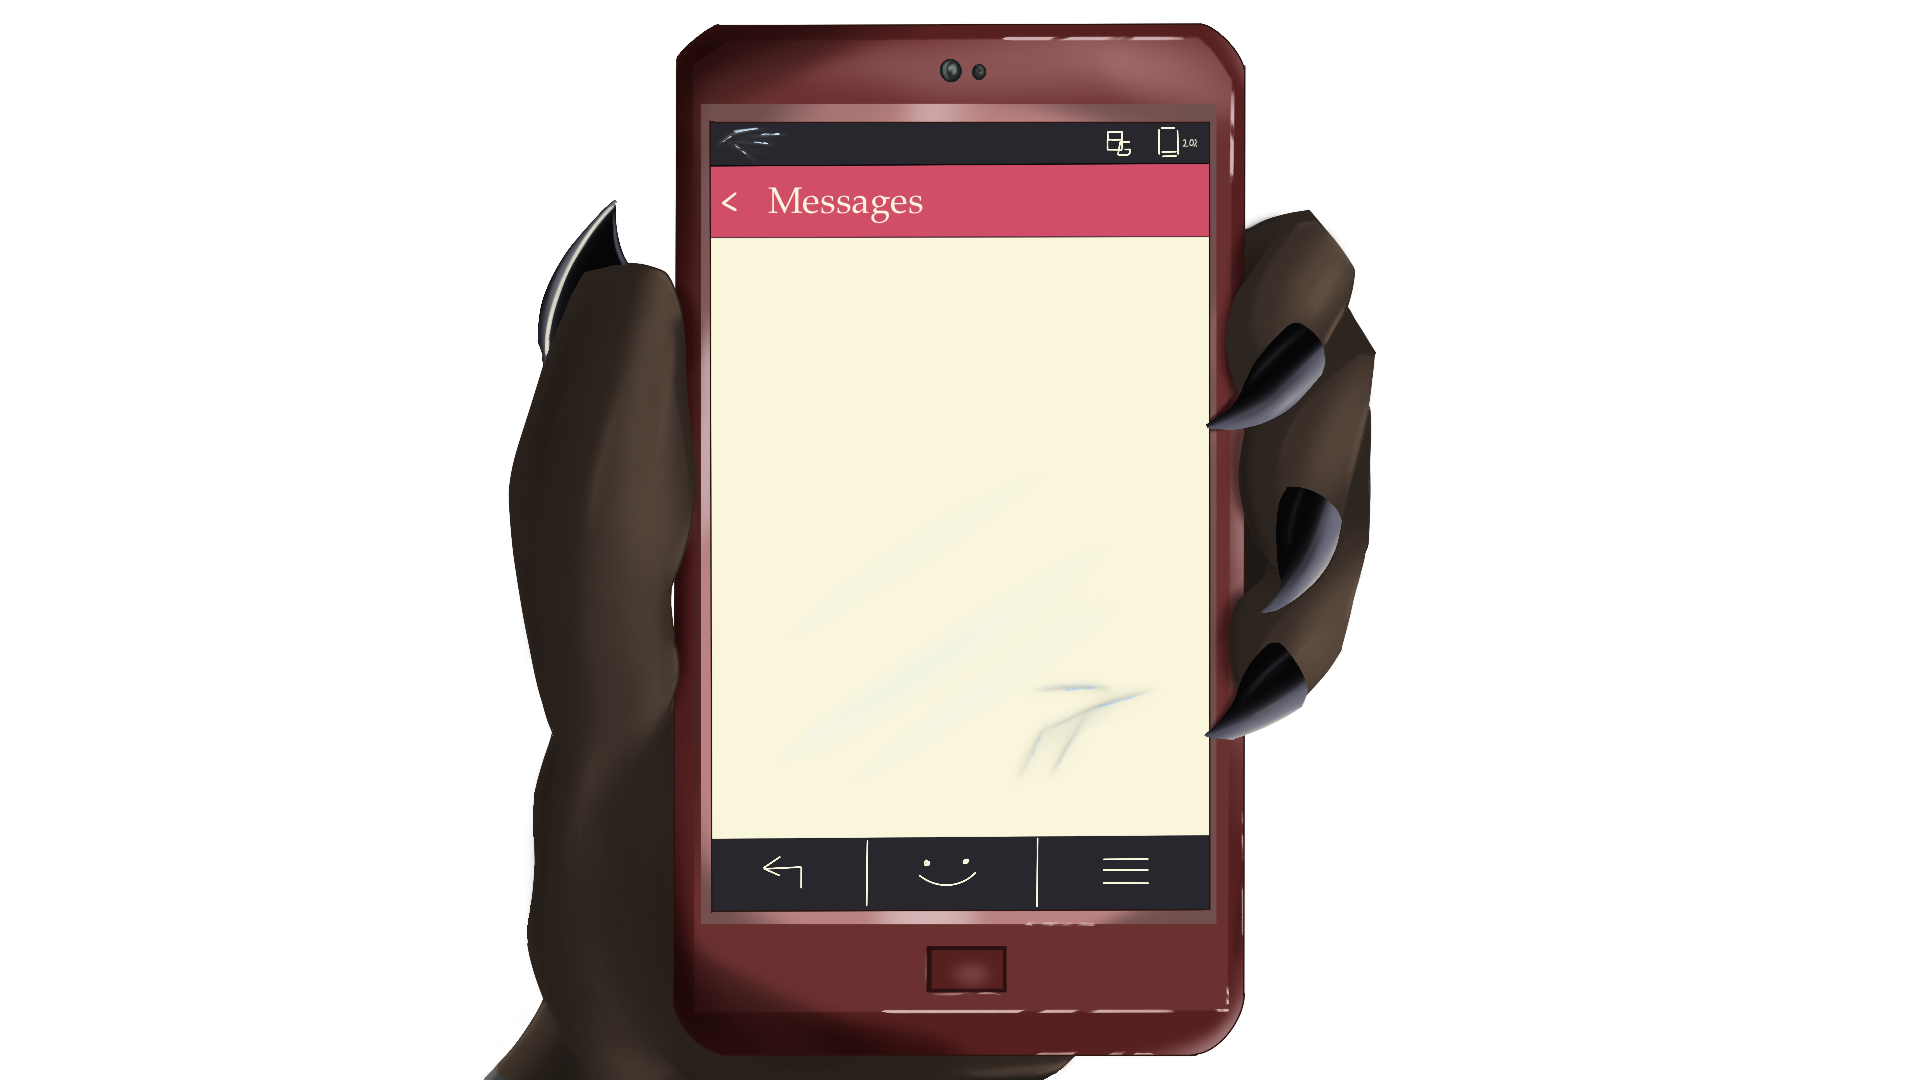 Brown paw with sharp black claws holds a red phone on a text message screen.